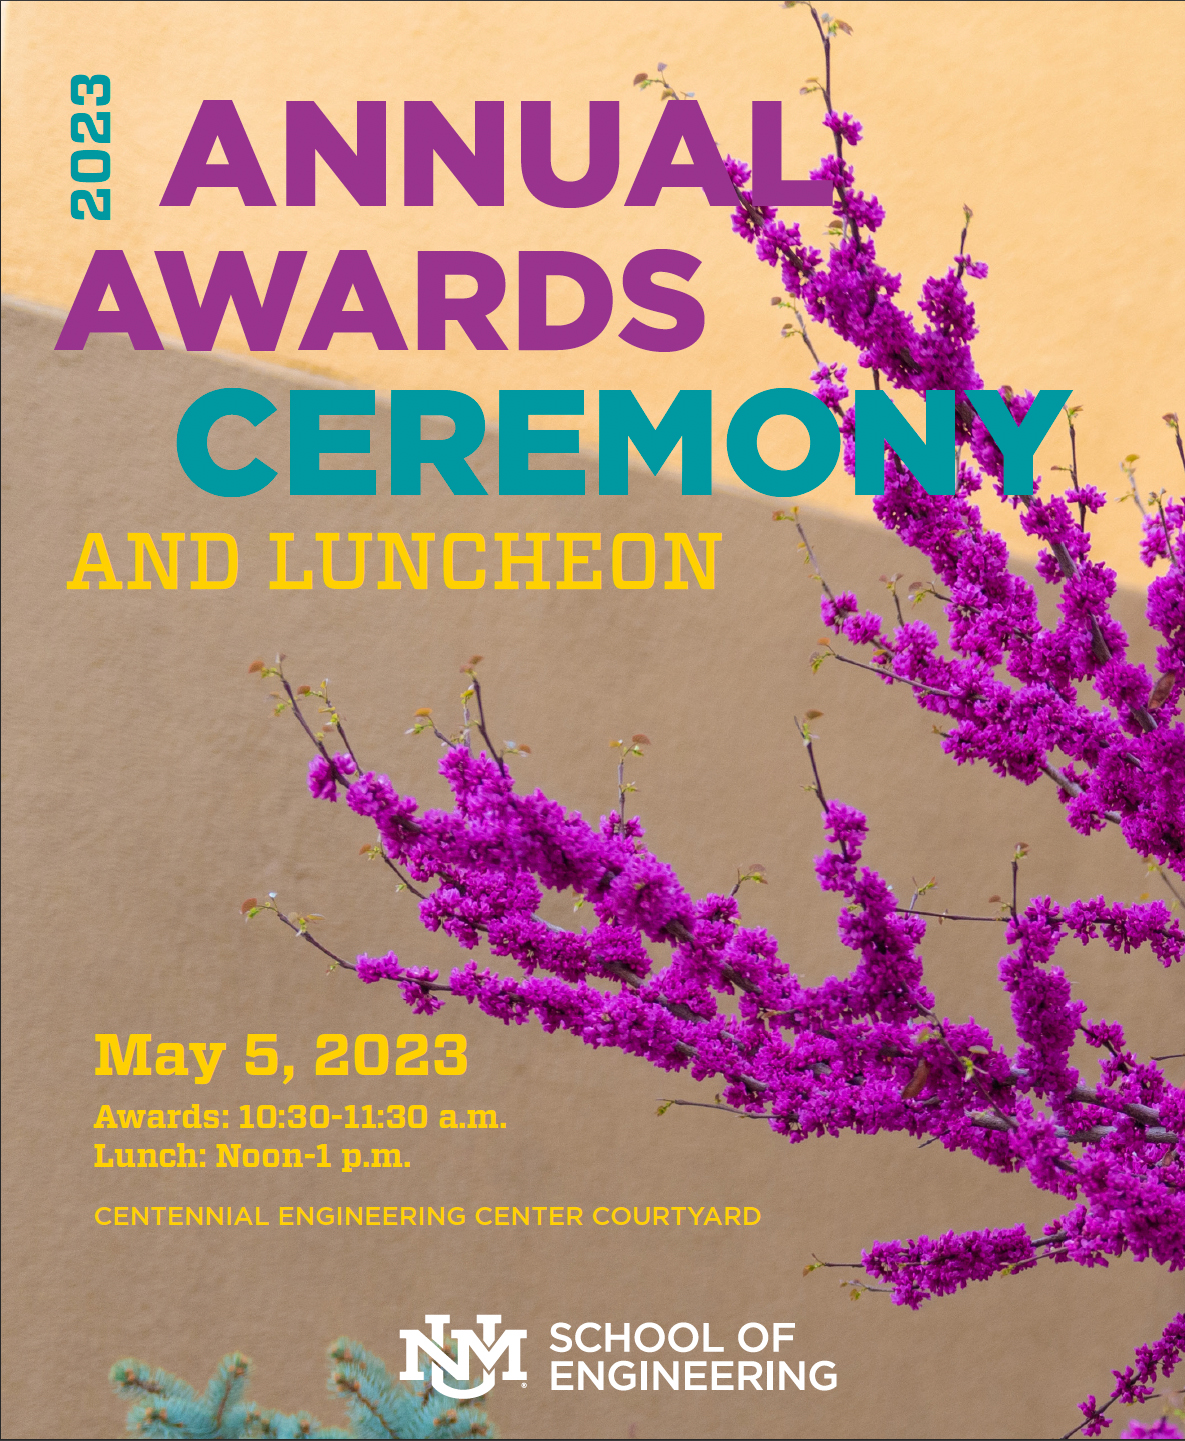 photo: image of the cover of the 2023 annual awards program